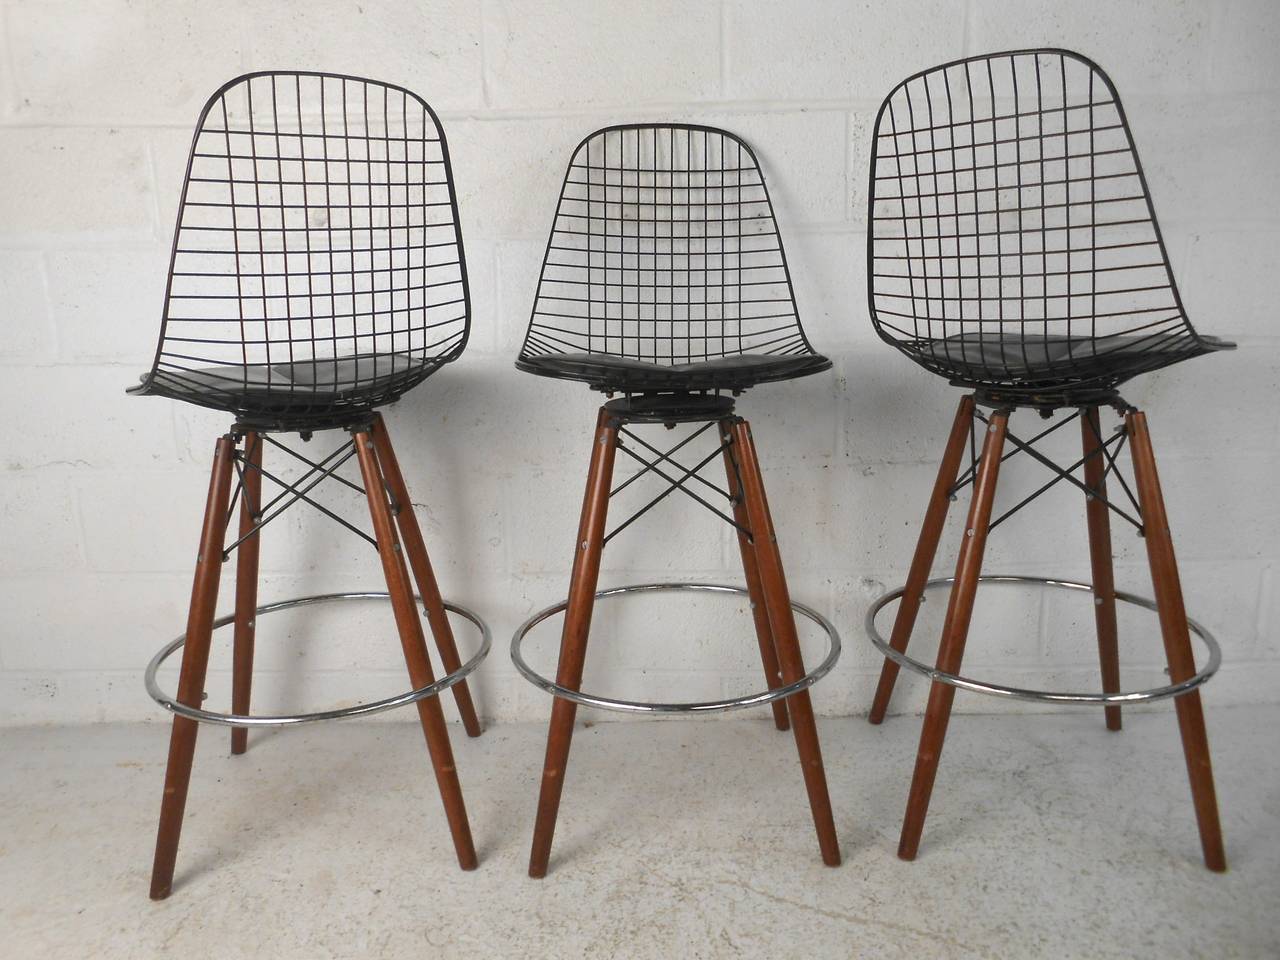 Unknown Set of Four Mid-Century Modern Barstools In the Style of Harry Bertoia for Knol